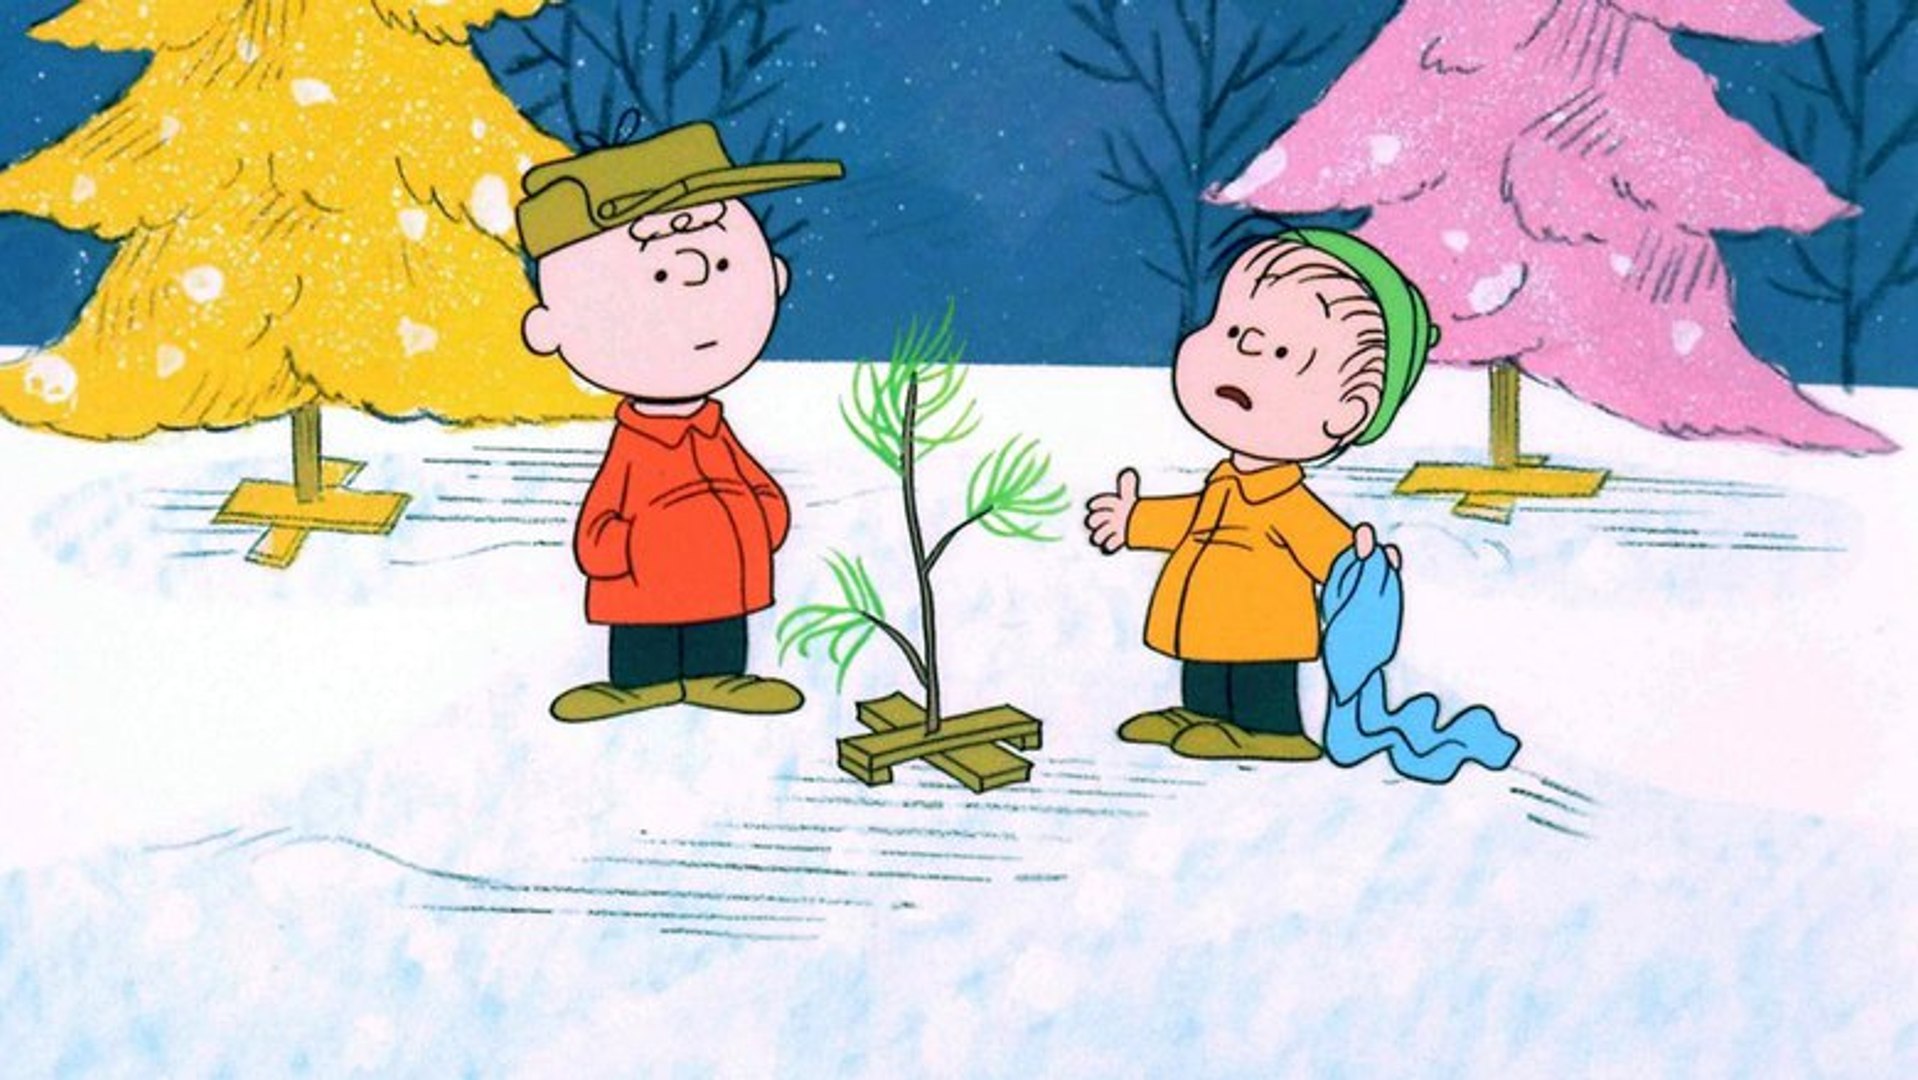 A Charlie Brown Christmas Full Movie - Video Dailymotion